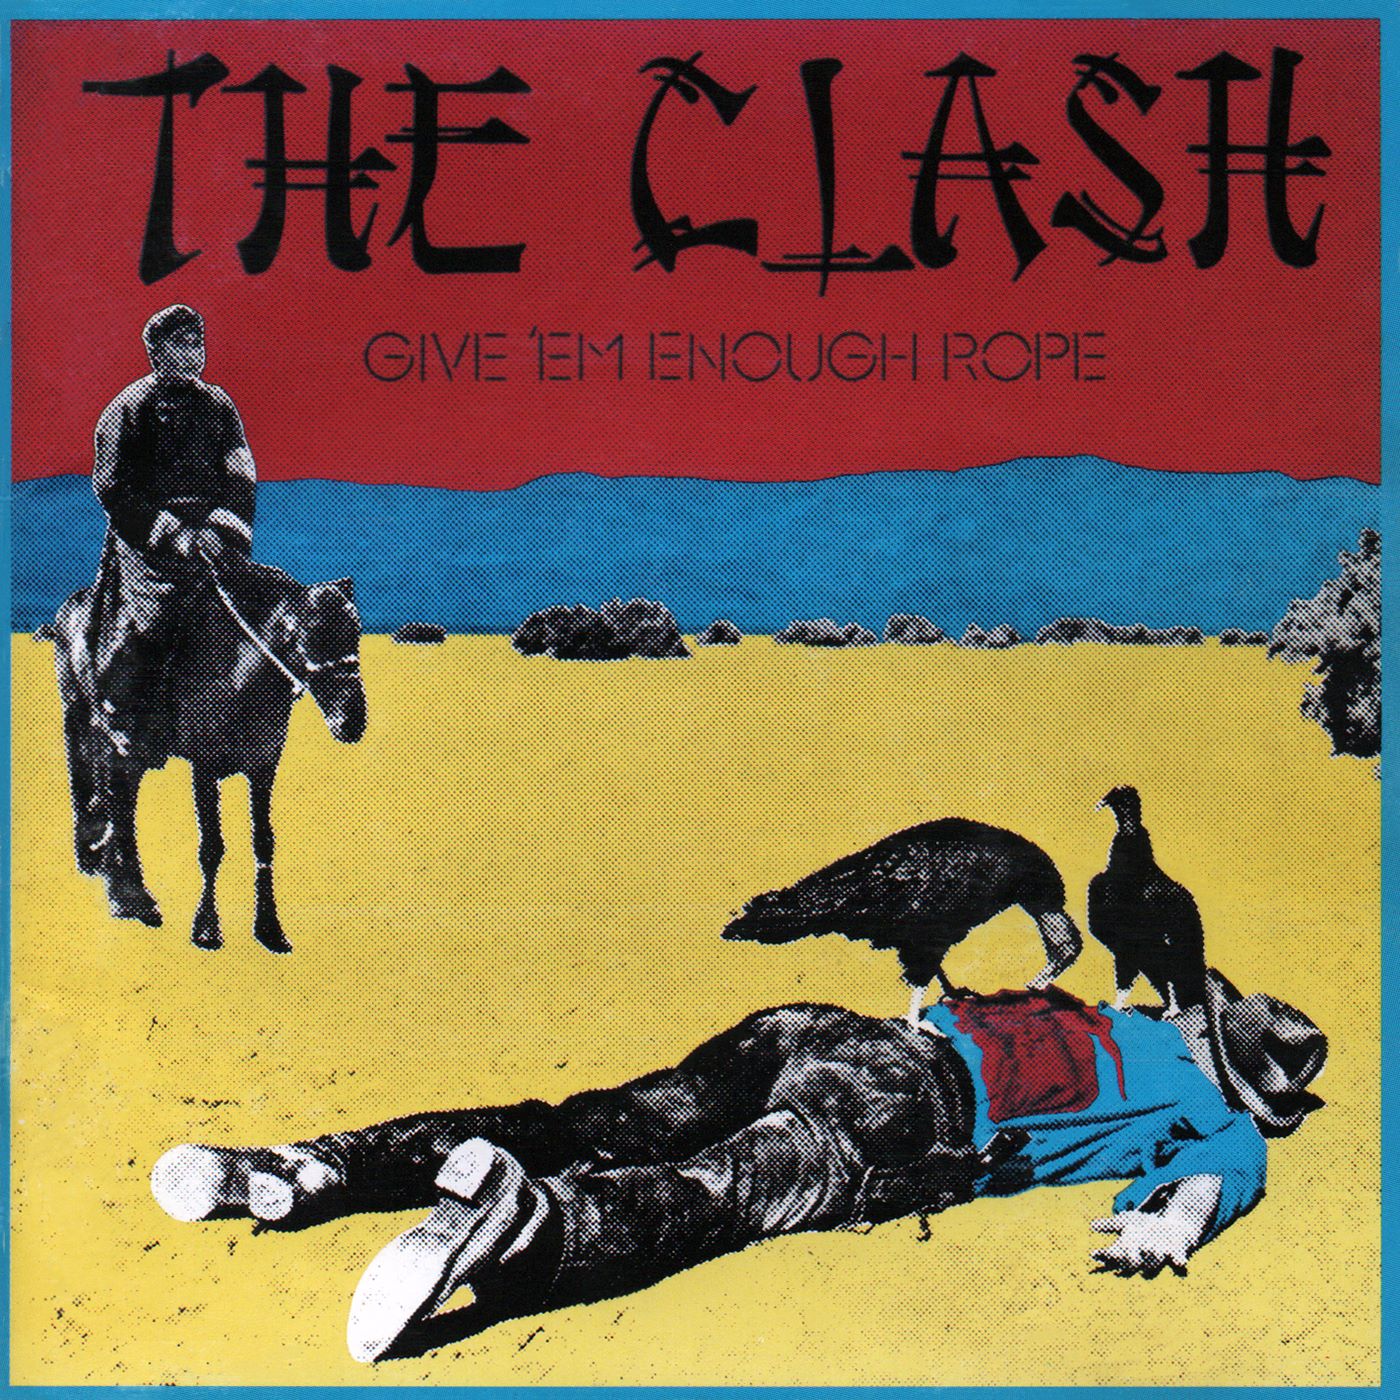 The Clash-1978-Give 'Em Enough Rope [ESCA 5267]